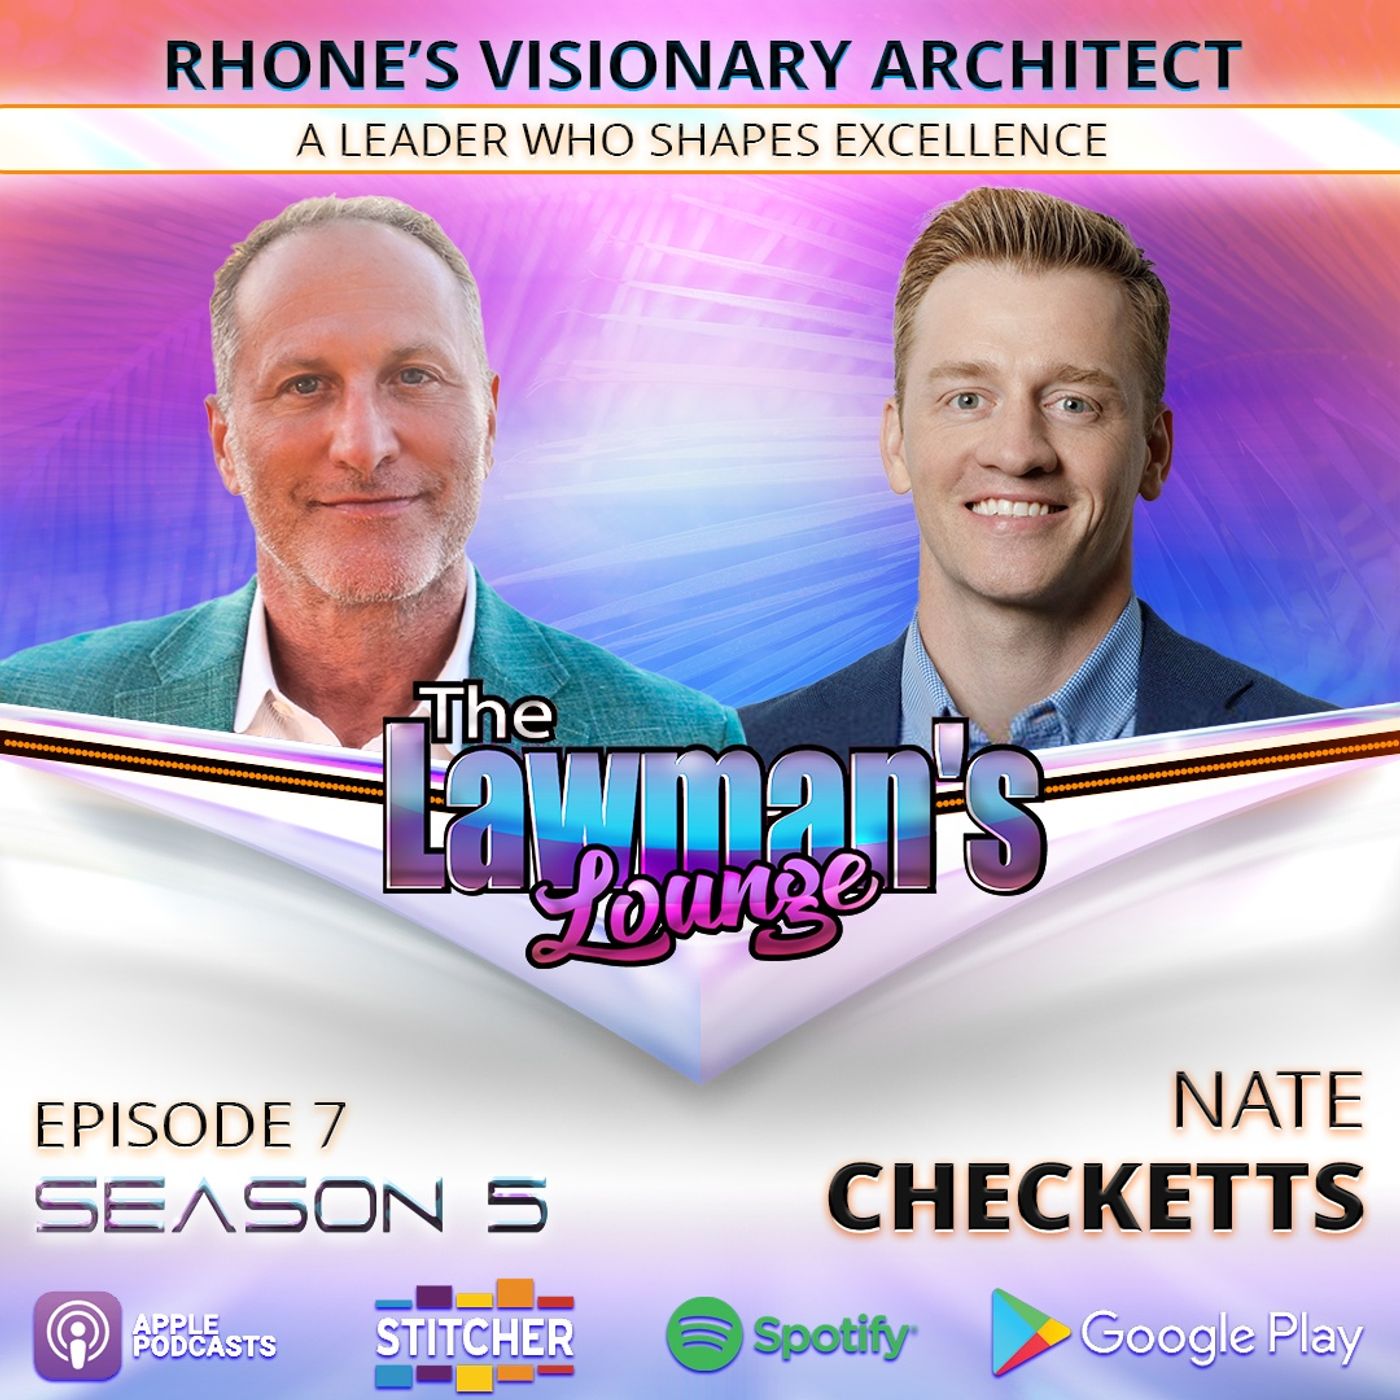 Rhone’s Visionary Architect: A Leader Who Shapes Excellence  with guest Nate Checketts